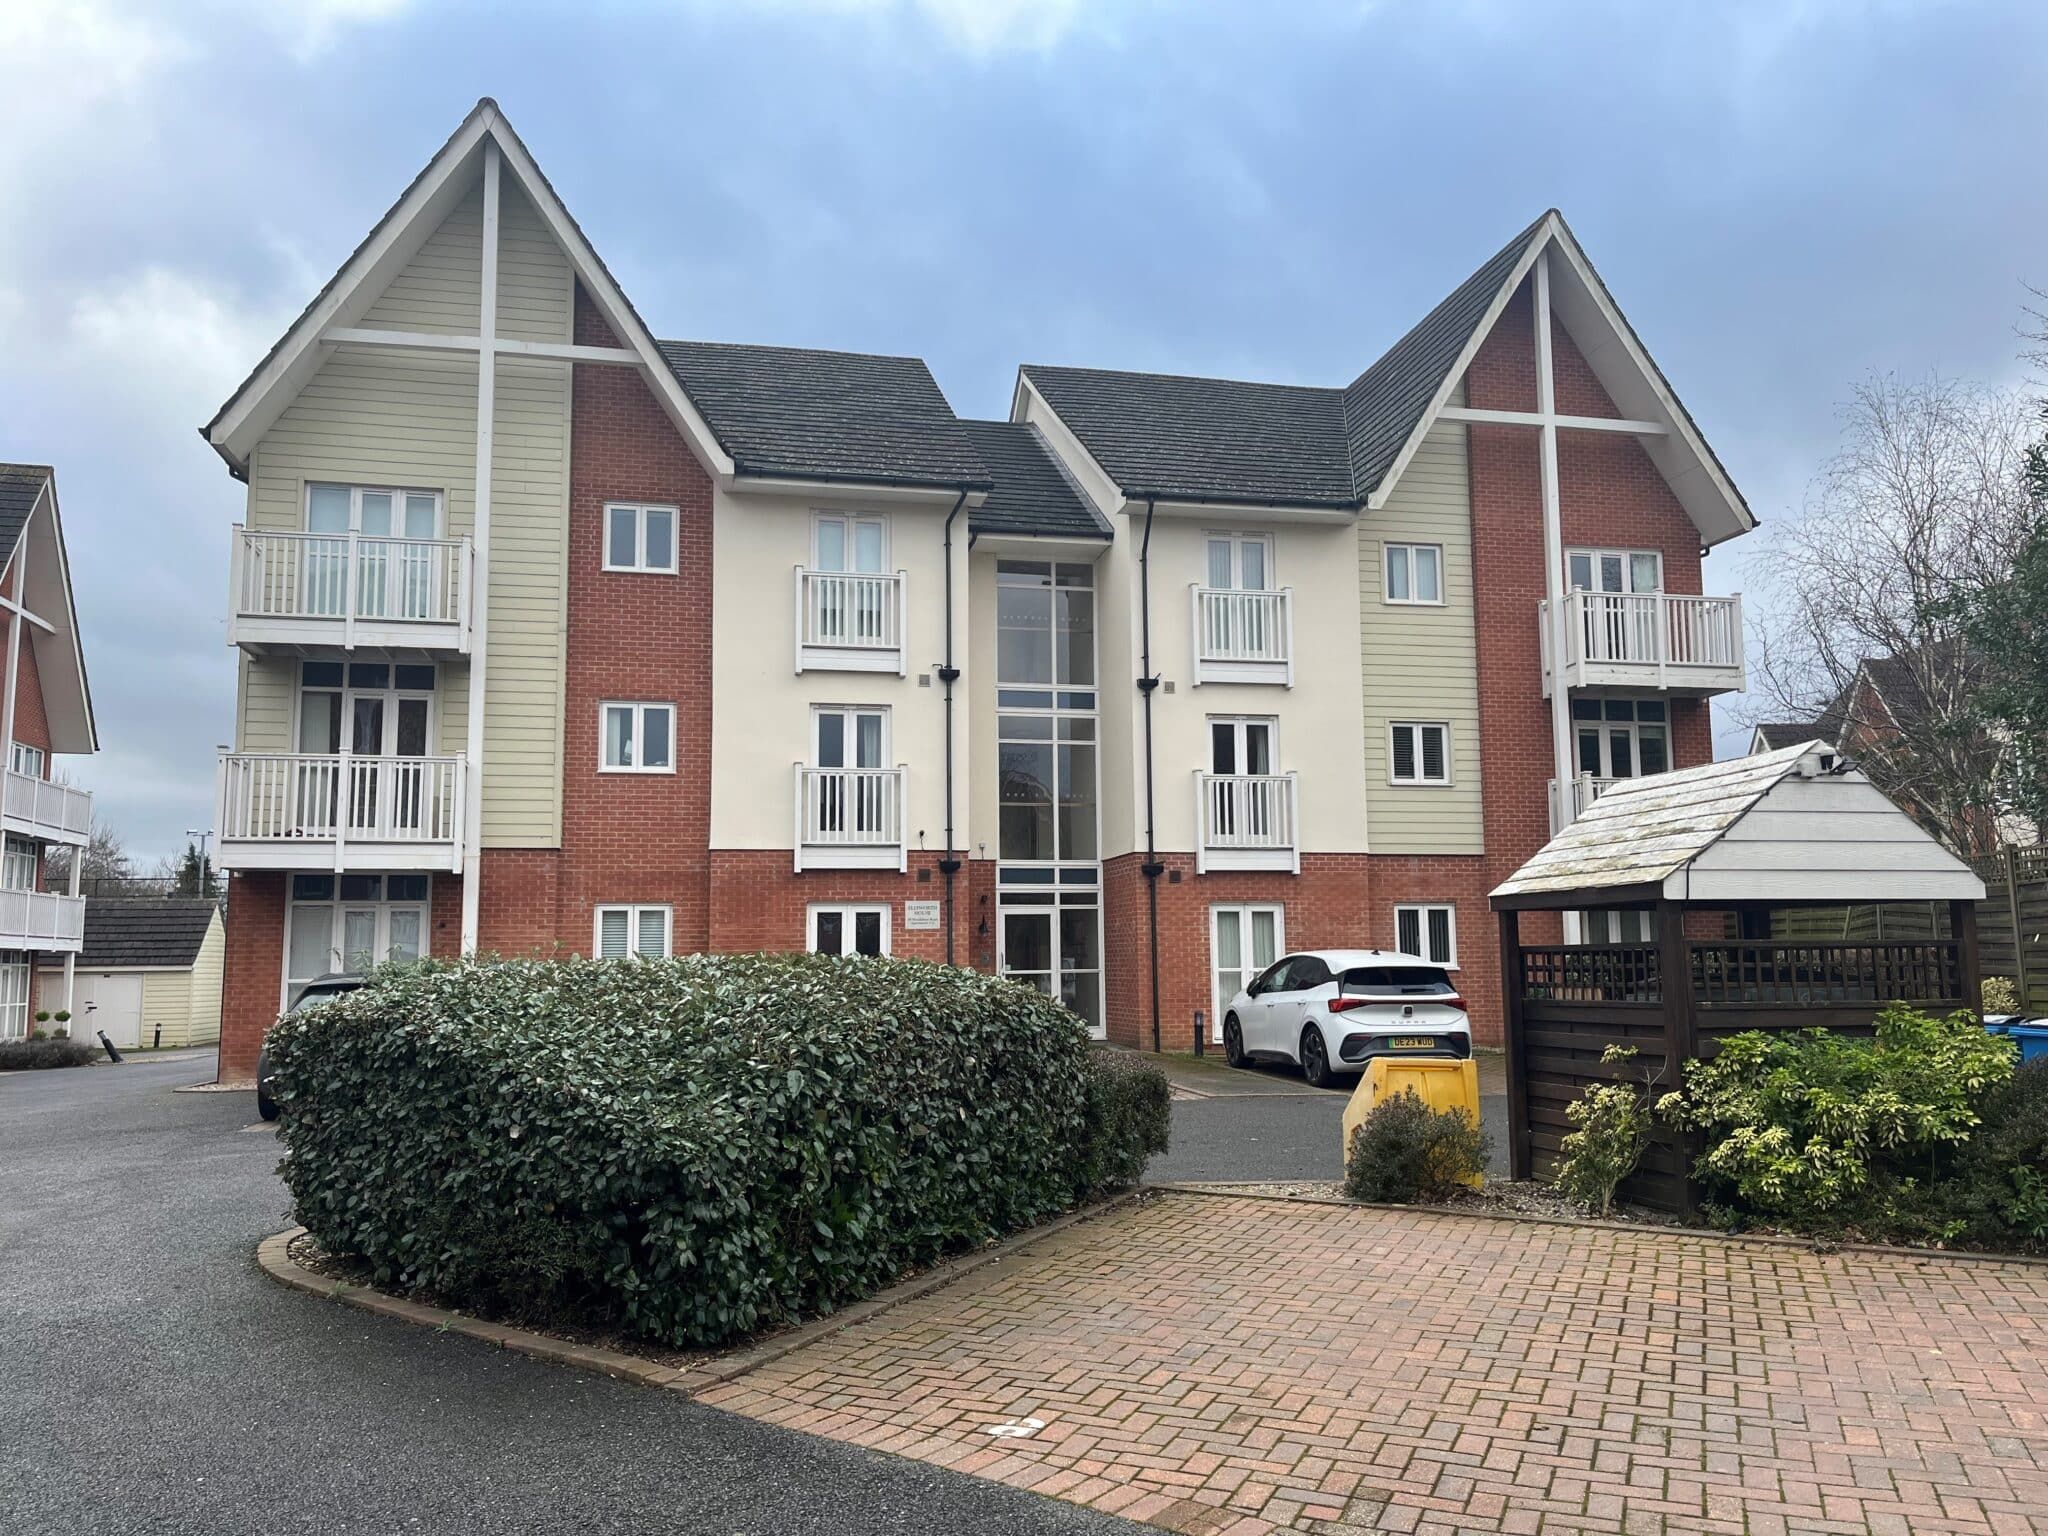 Apartment 3, Ellsworth House, Solihull, 58 Woodshires Road, B92 7DN